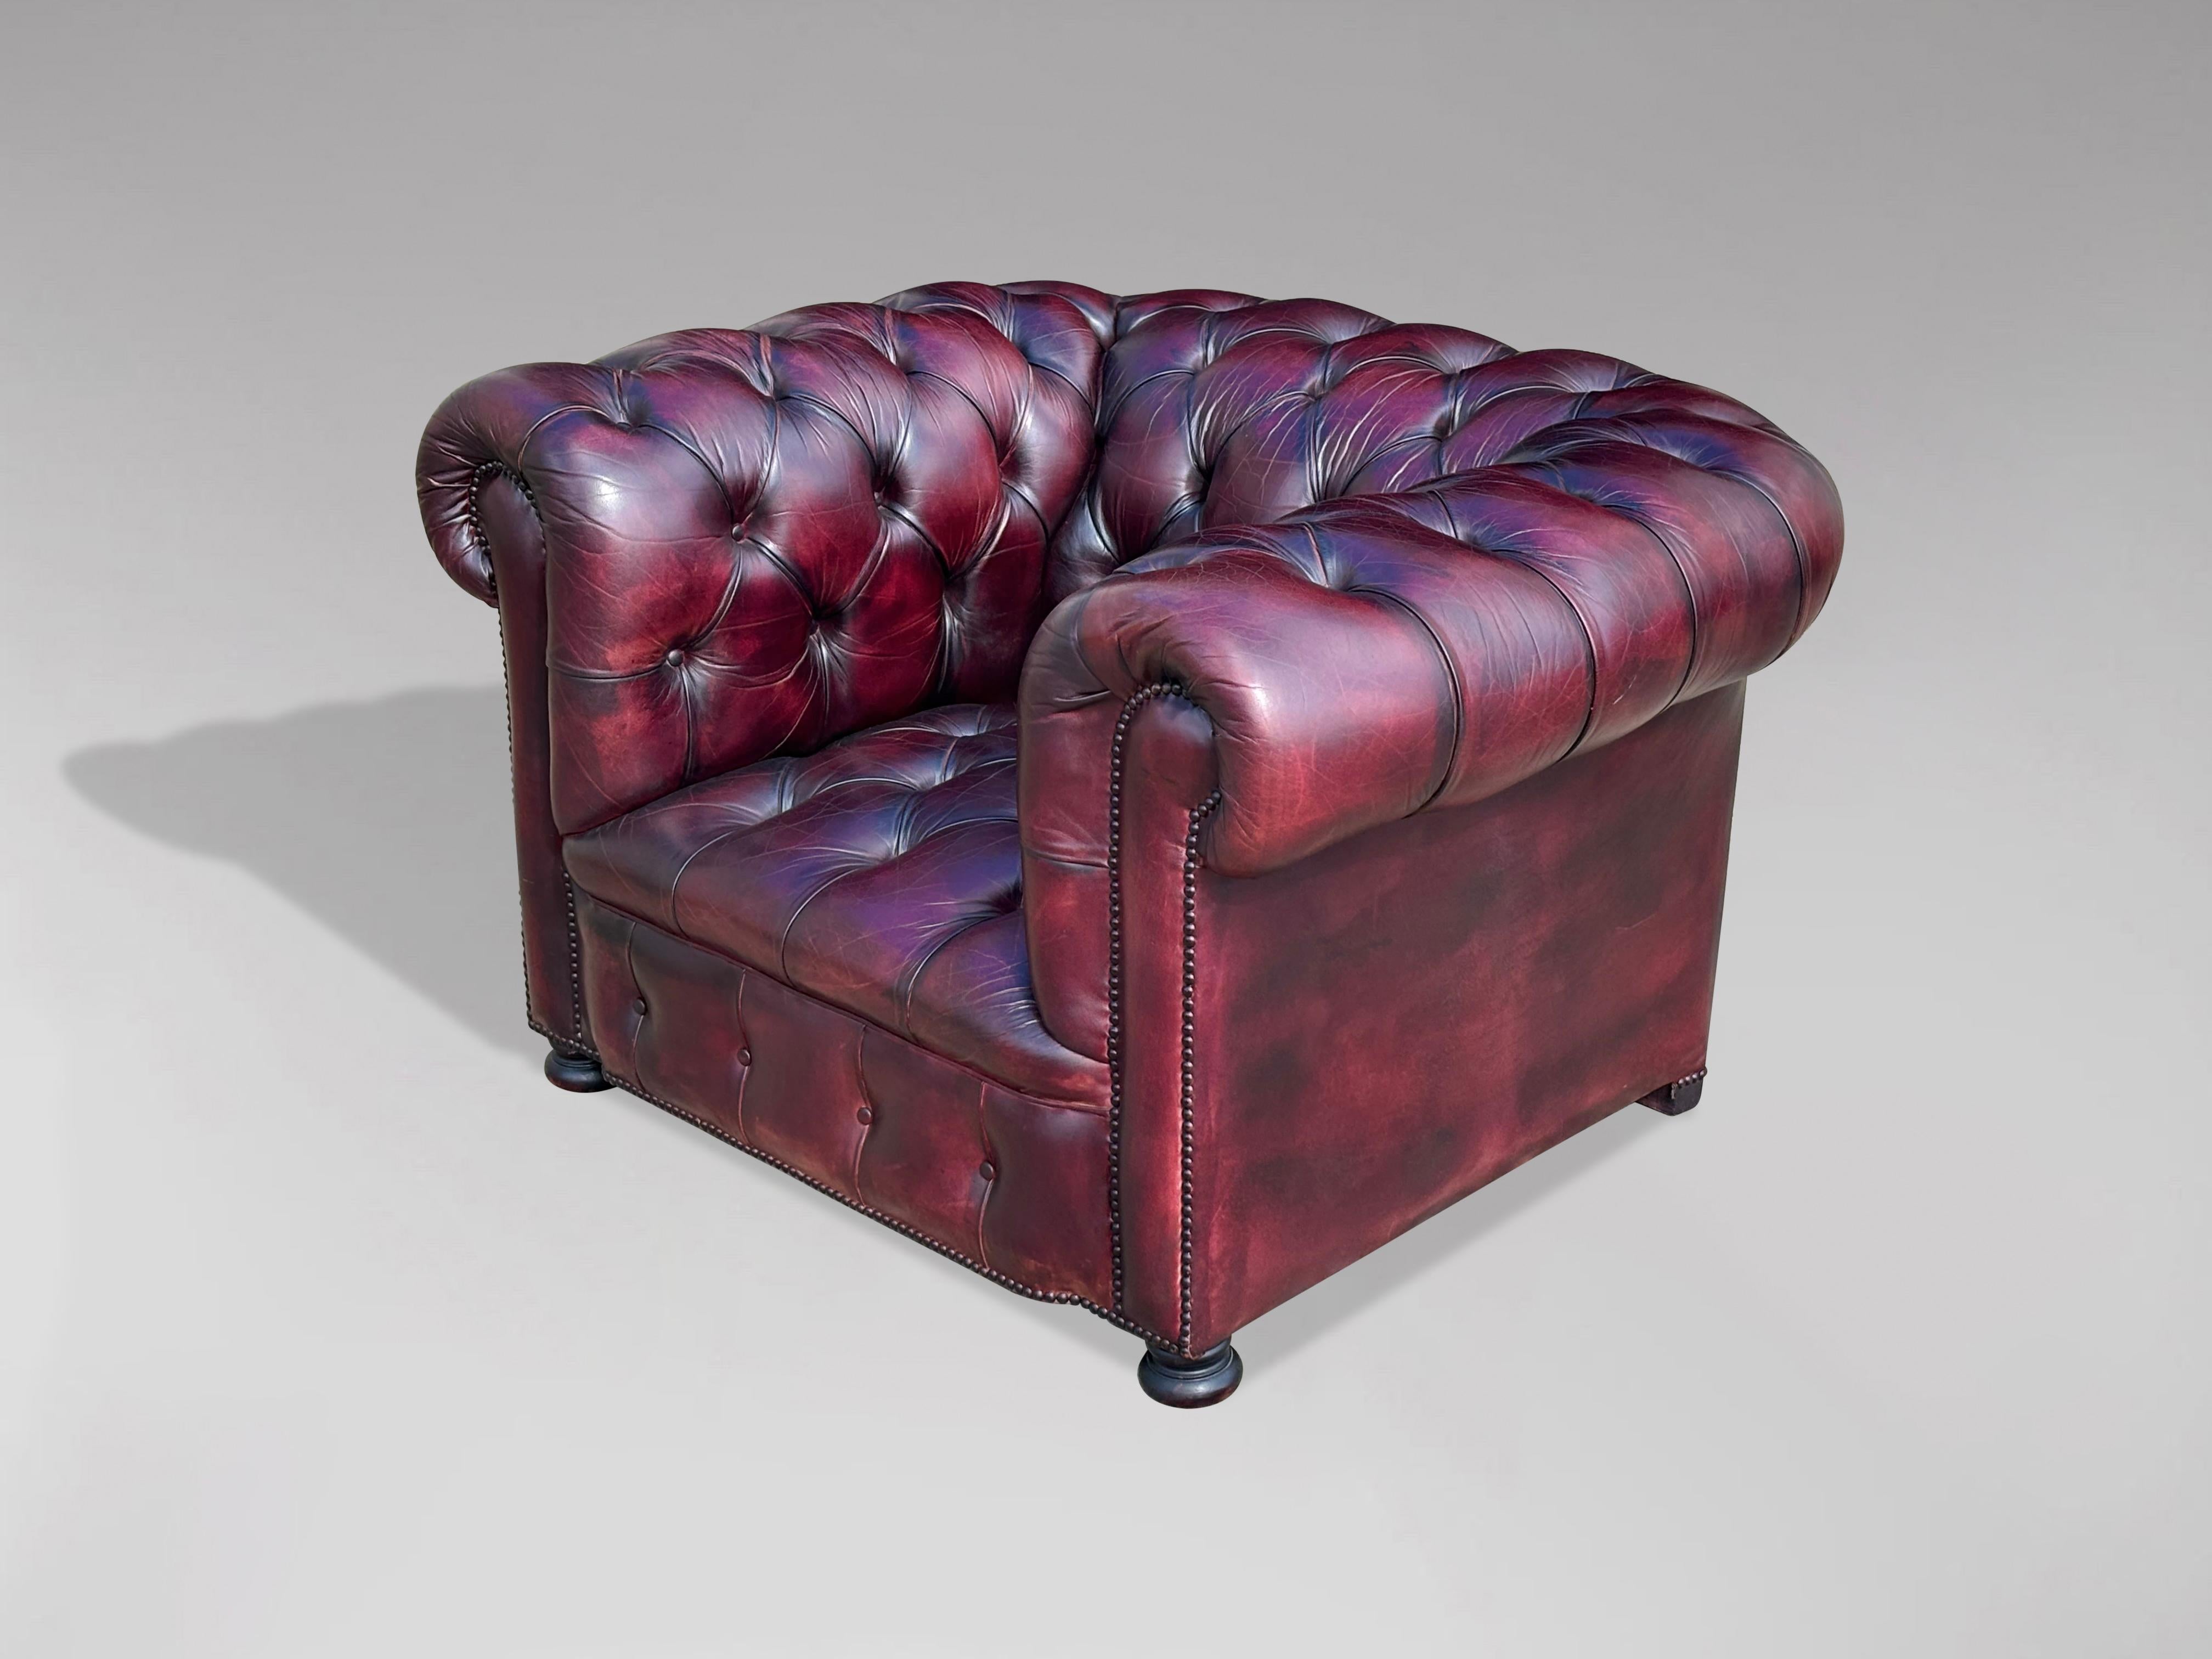 Stunning Three Piece Burgundy Leather Chesterfield Suite For Sale 7